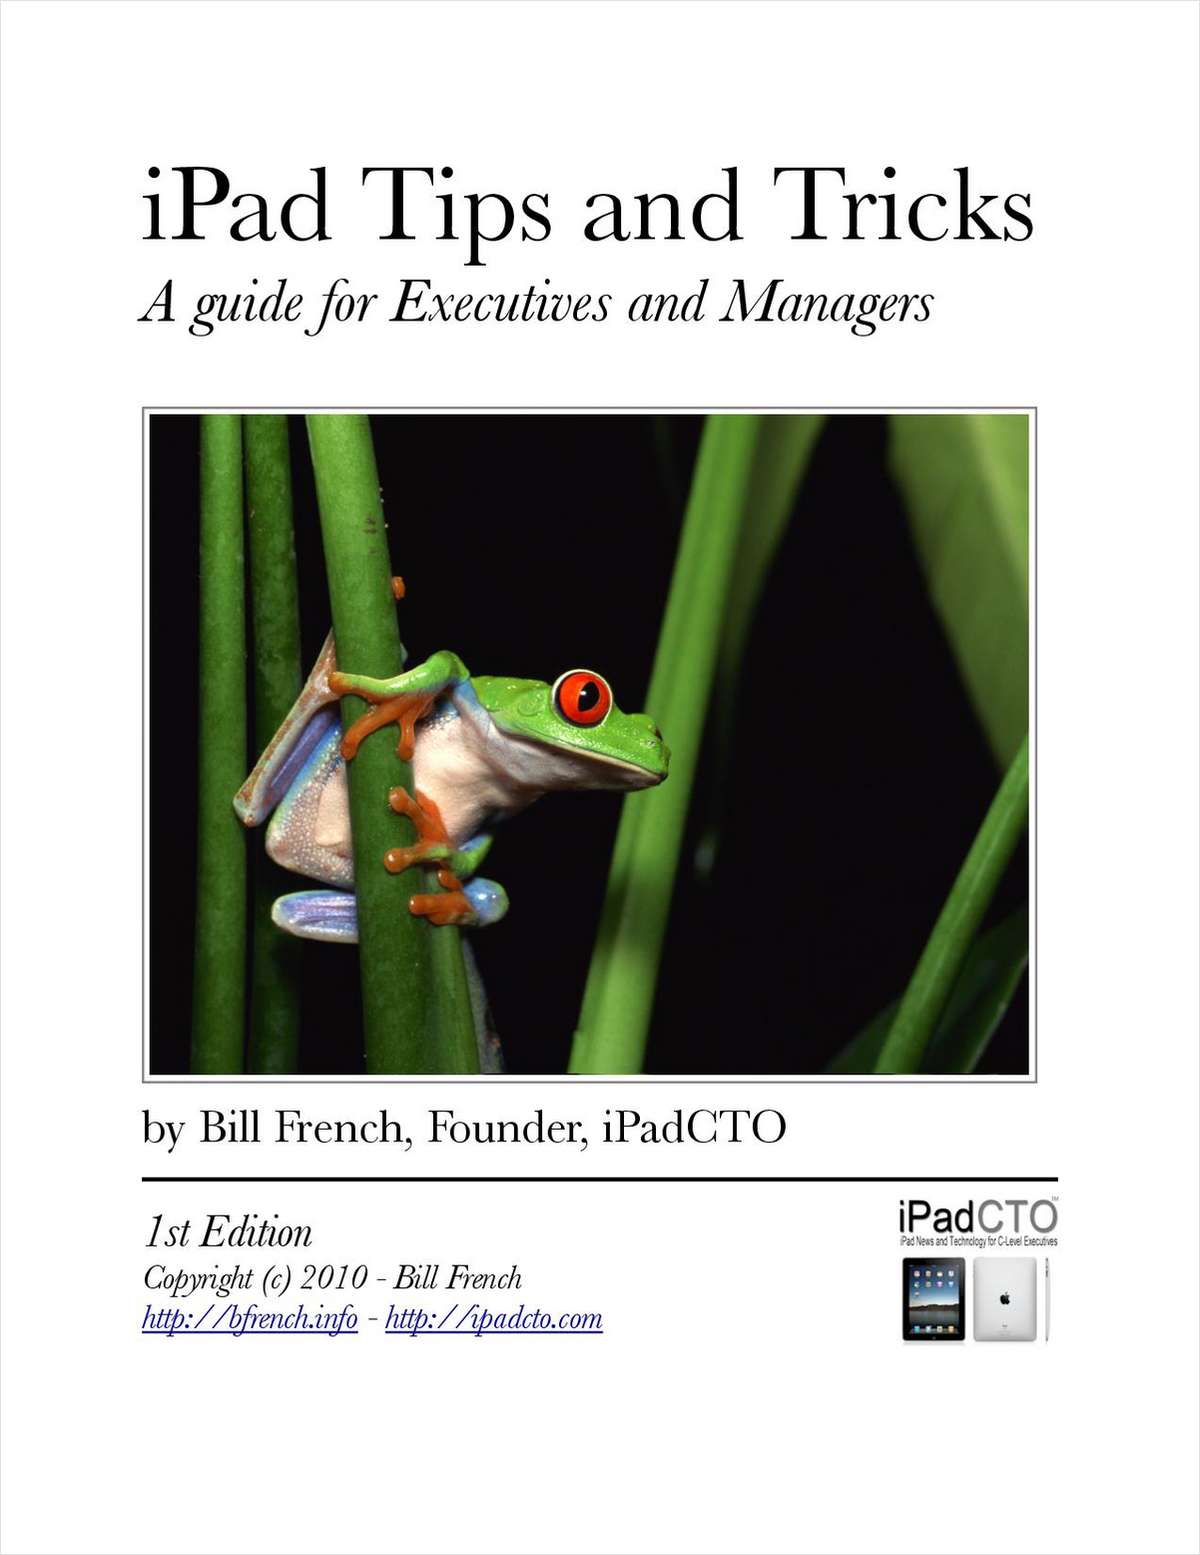 iPad Tips and Tricks - A Guide for Executives and Managers